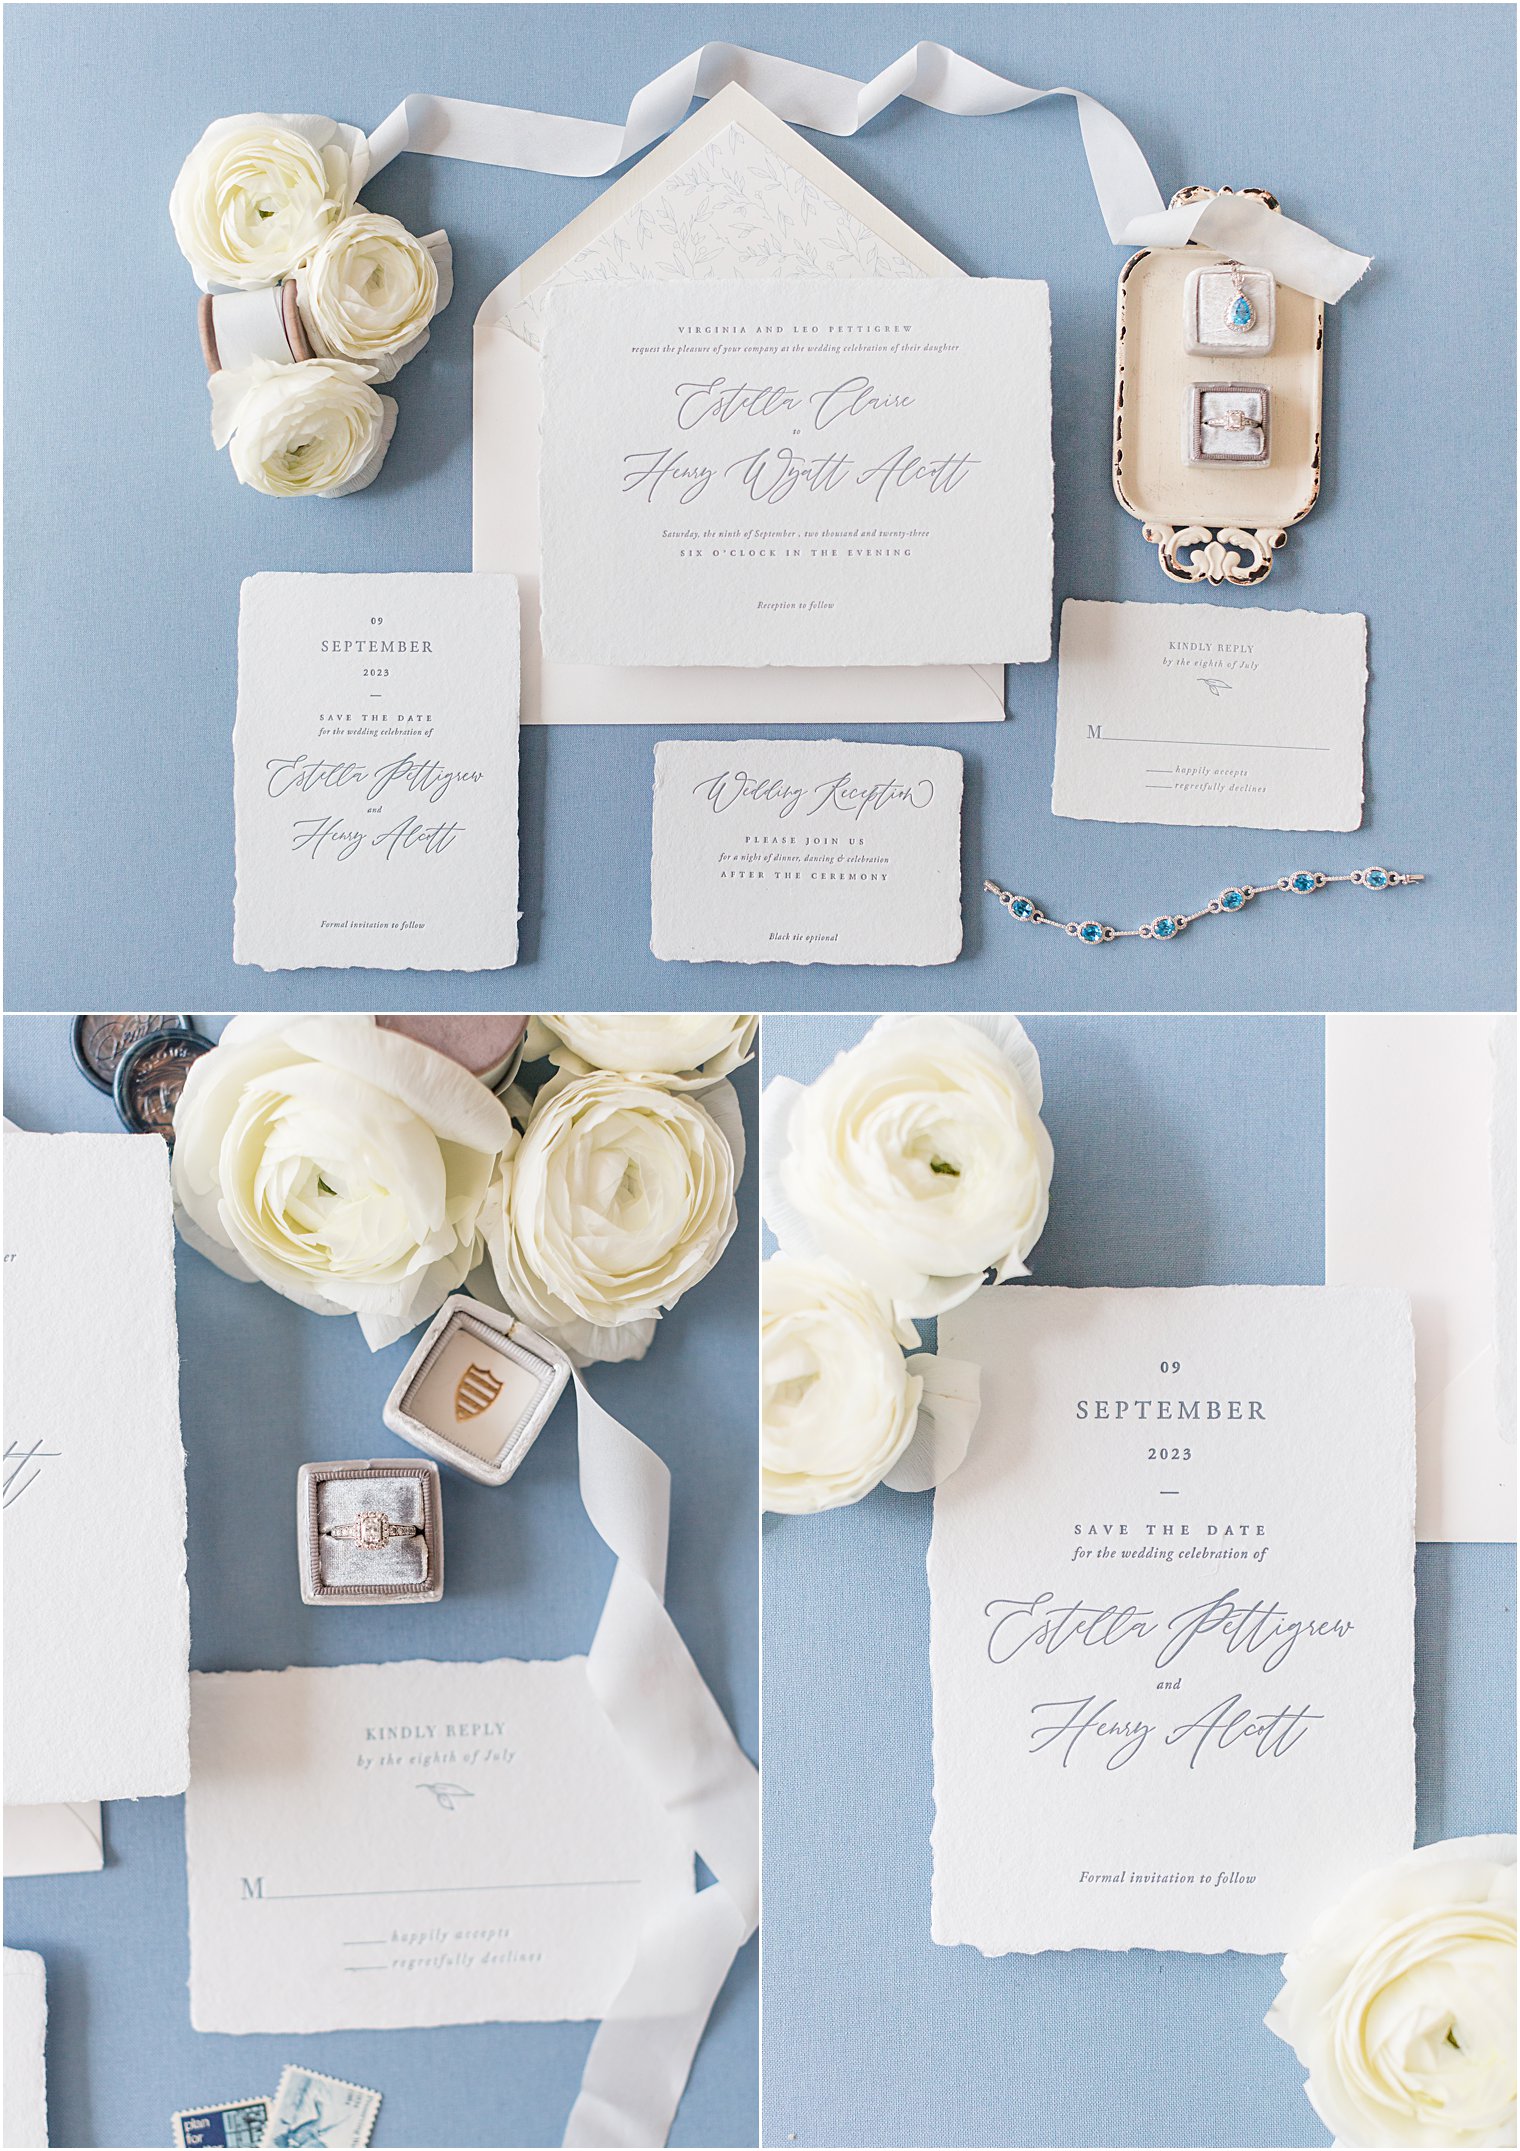 wedding invitations and details for WOTW wedding editorial 